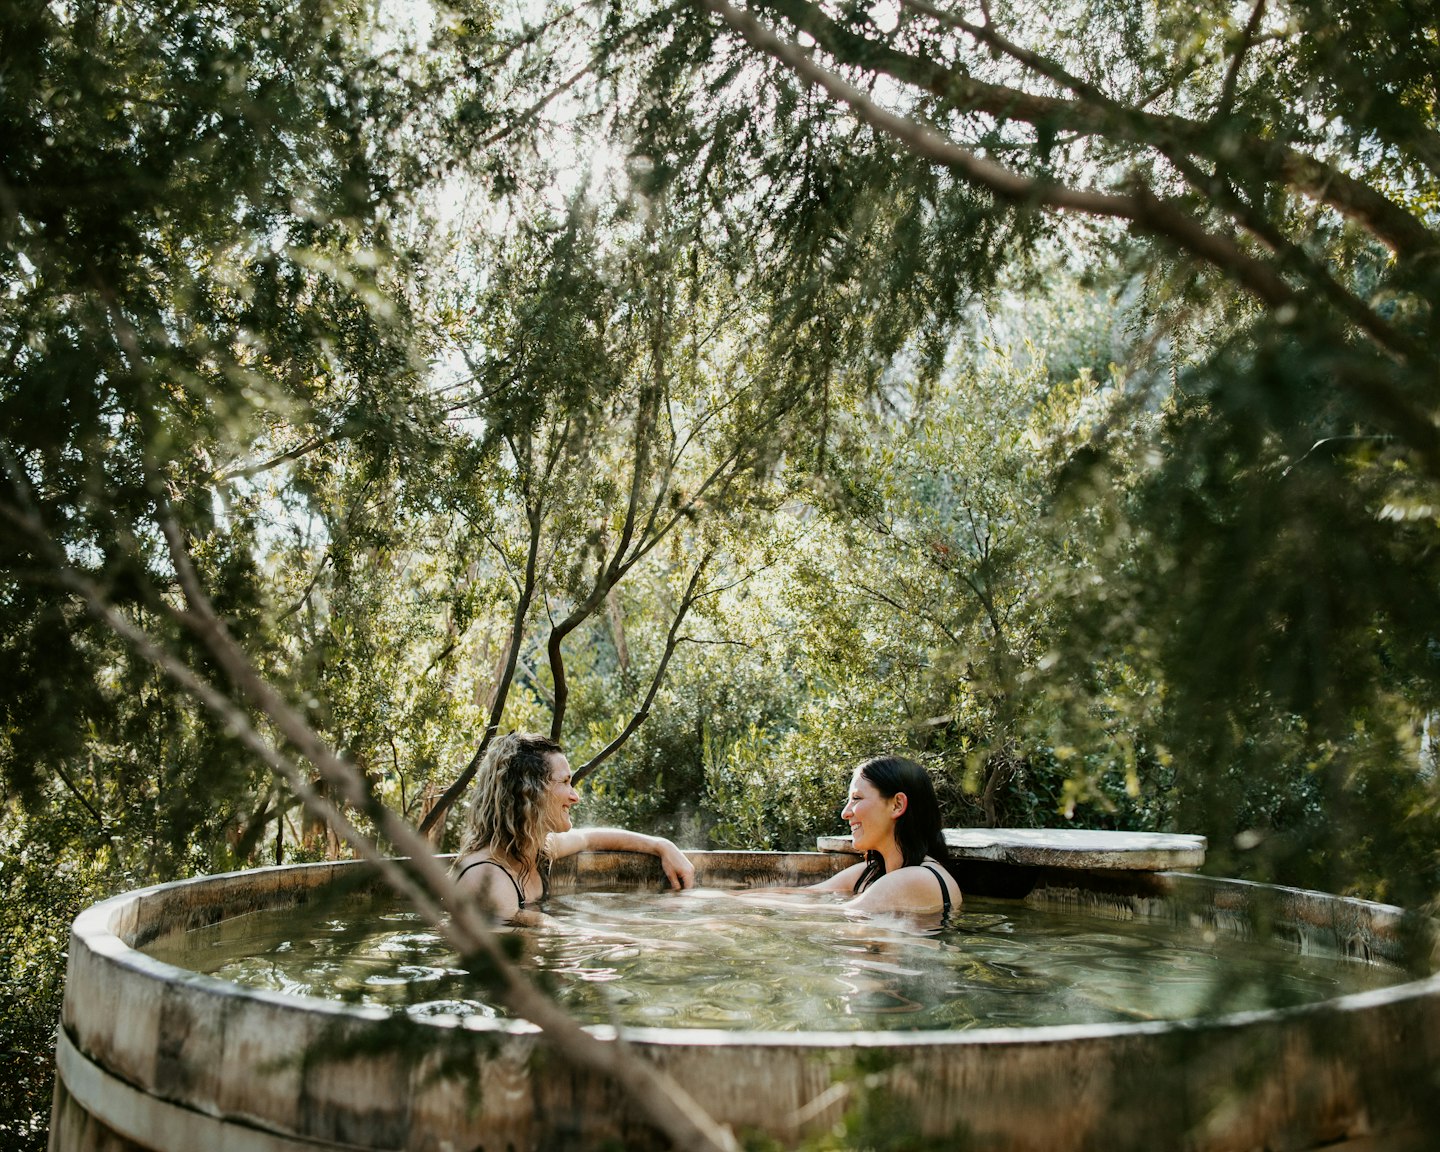 two women sitting and laughing in the barrel pool